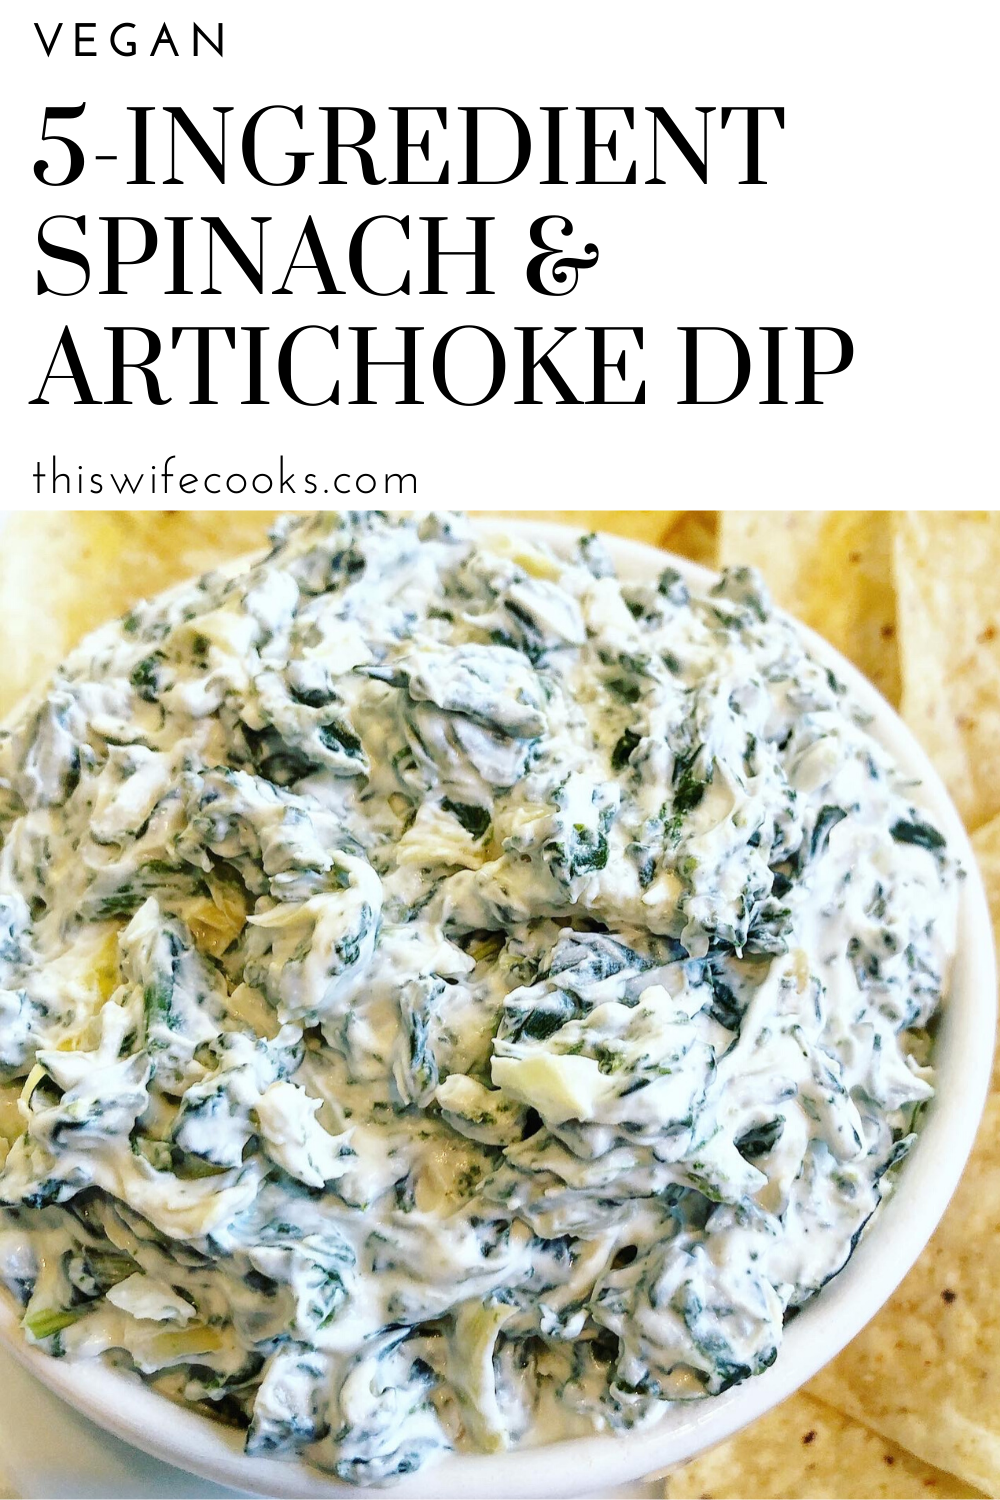 Vegan Spinacn and Artichoke Dip - A classic make-ahead spinach and artichoke dip, perfect for holidays, potlucks, and parties! via @thiswifecooks